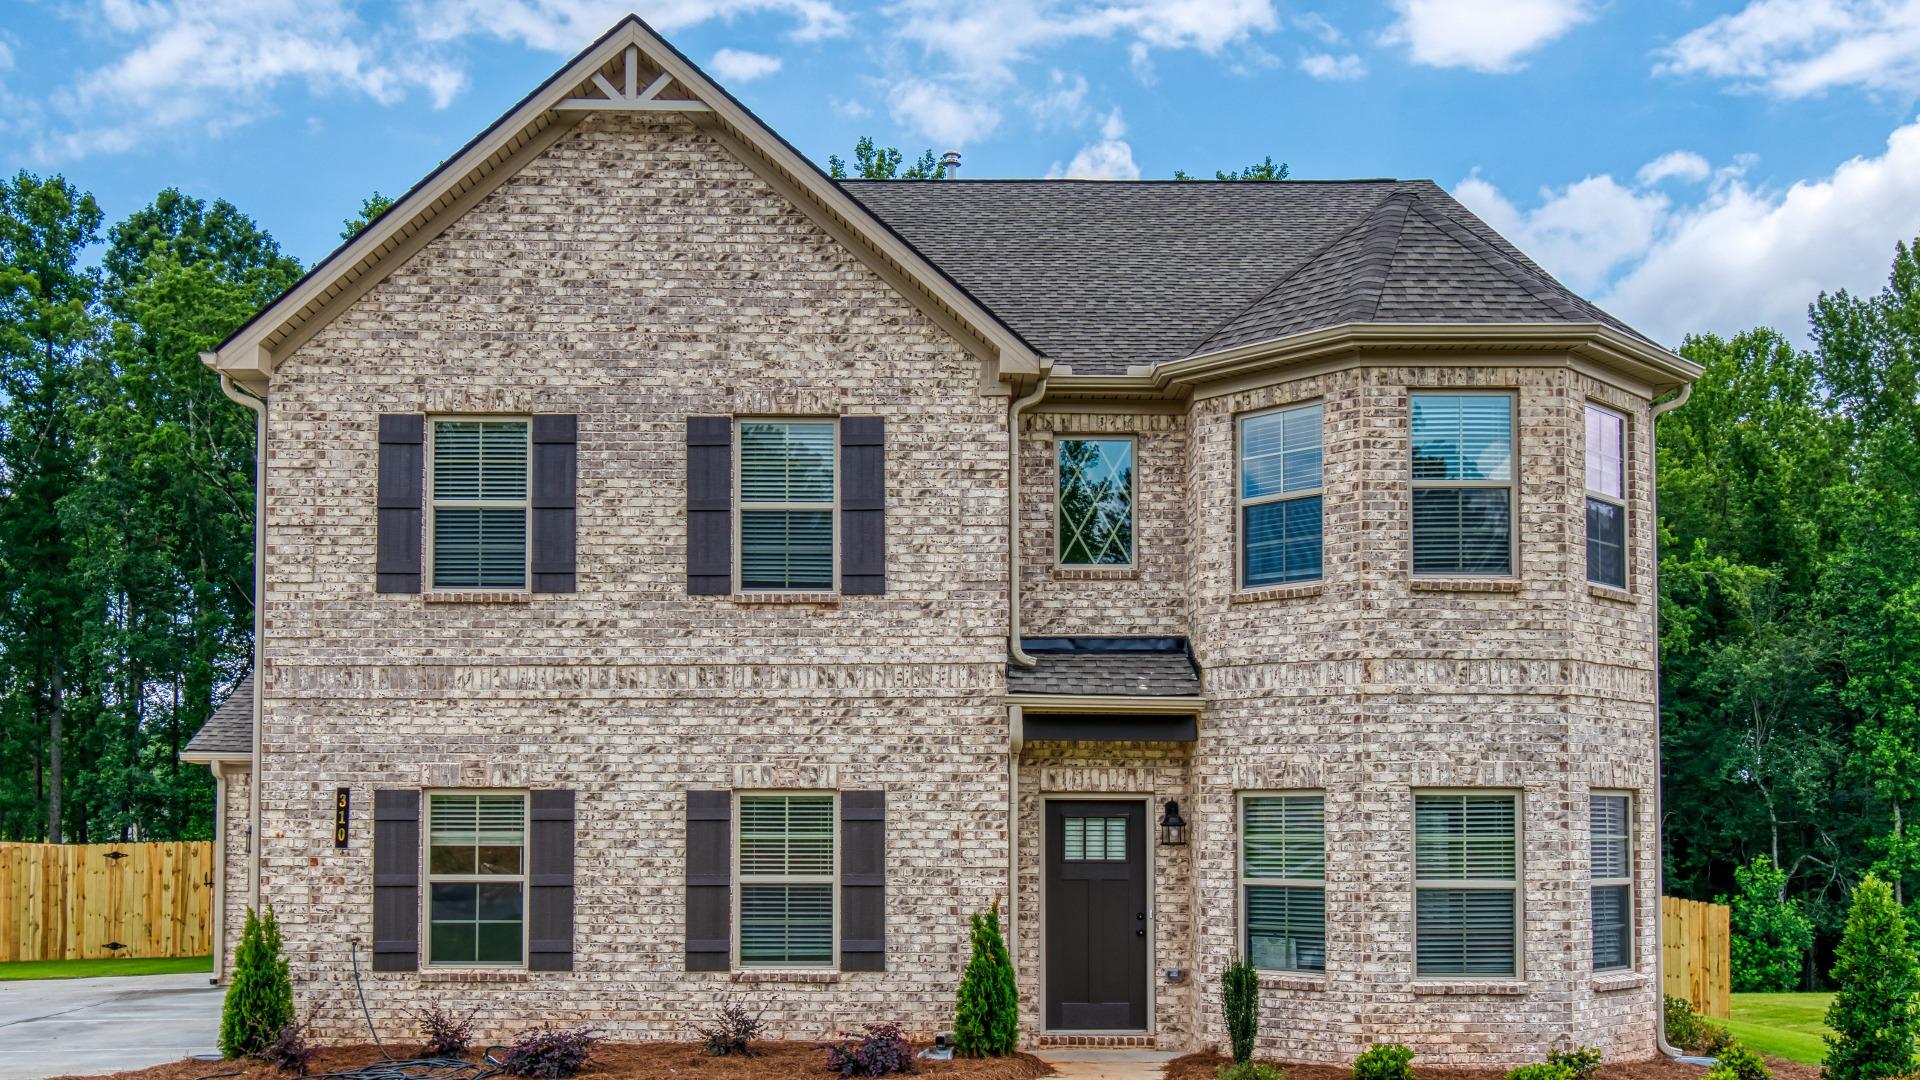 All brick 2 story home in the DRB Homes Traditions at Crystal Lake community